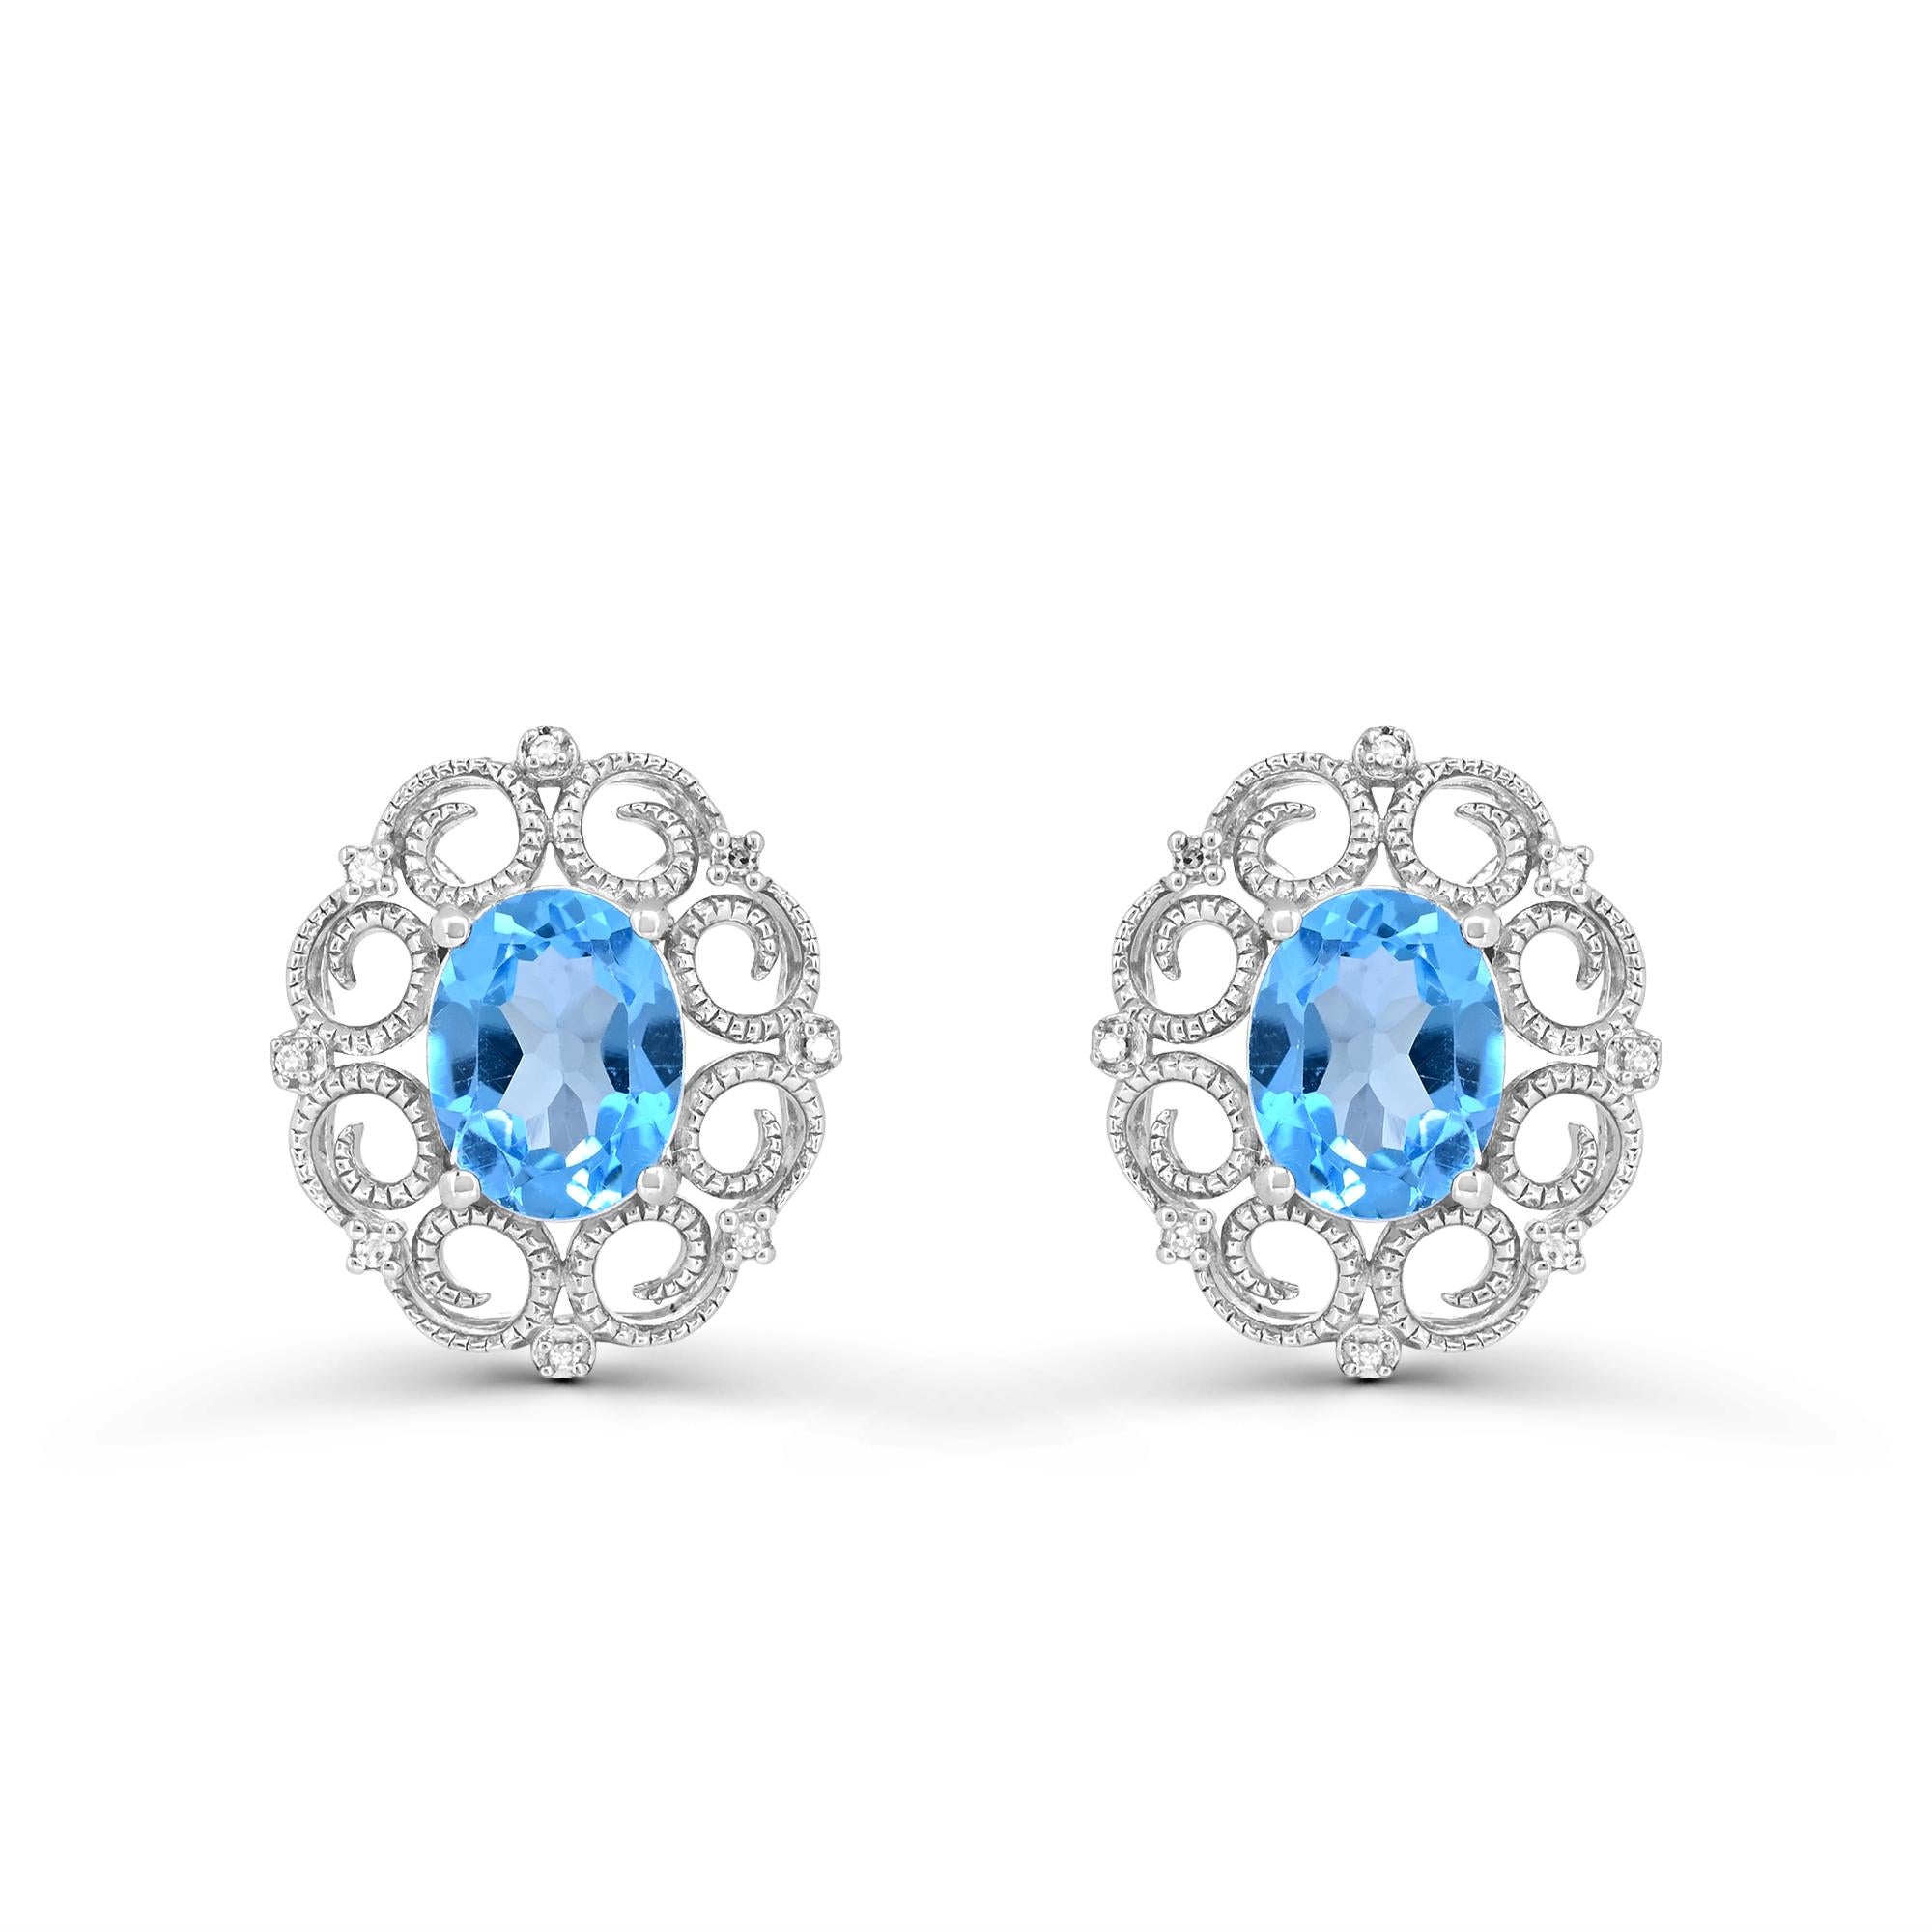 Contemporary 4-1/2 Carat Swiss Blue Topaz and White Diamond Stud Sterling Silver Earrings For Sale